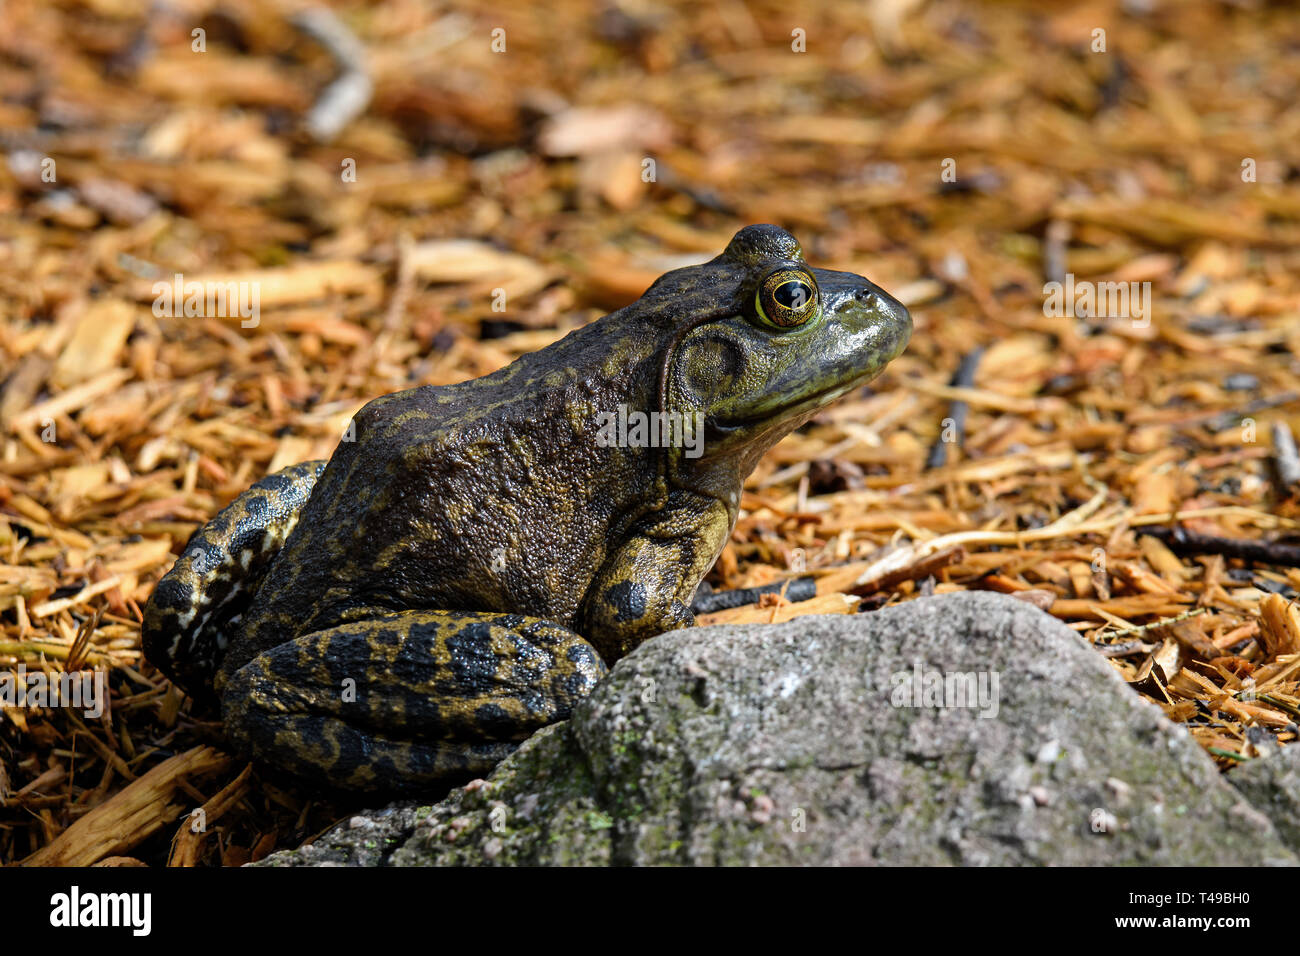 American bullfrog sitting at ponds edge in early morning sun. It is an amphibious frog, and a member of the family Ranidae. Stock Photo